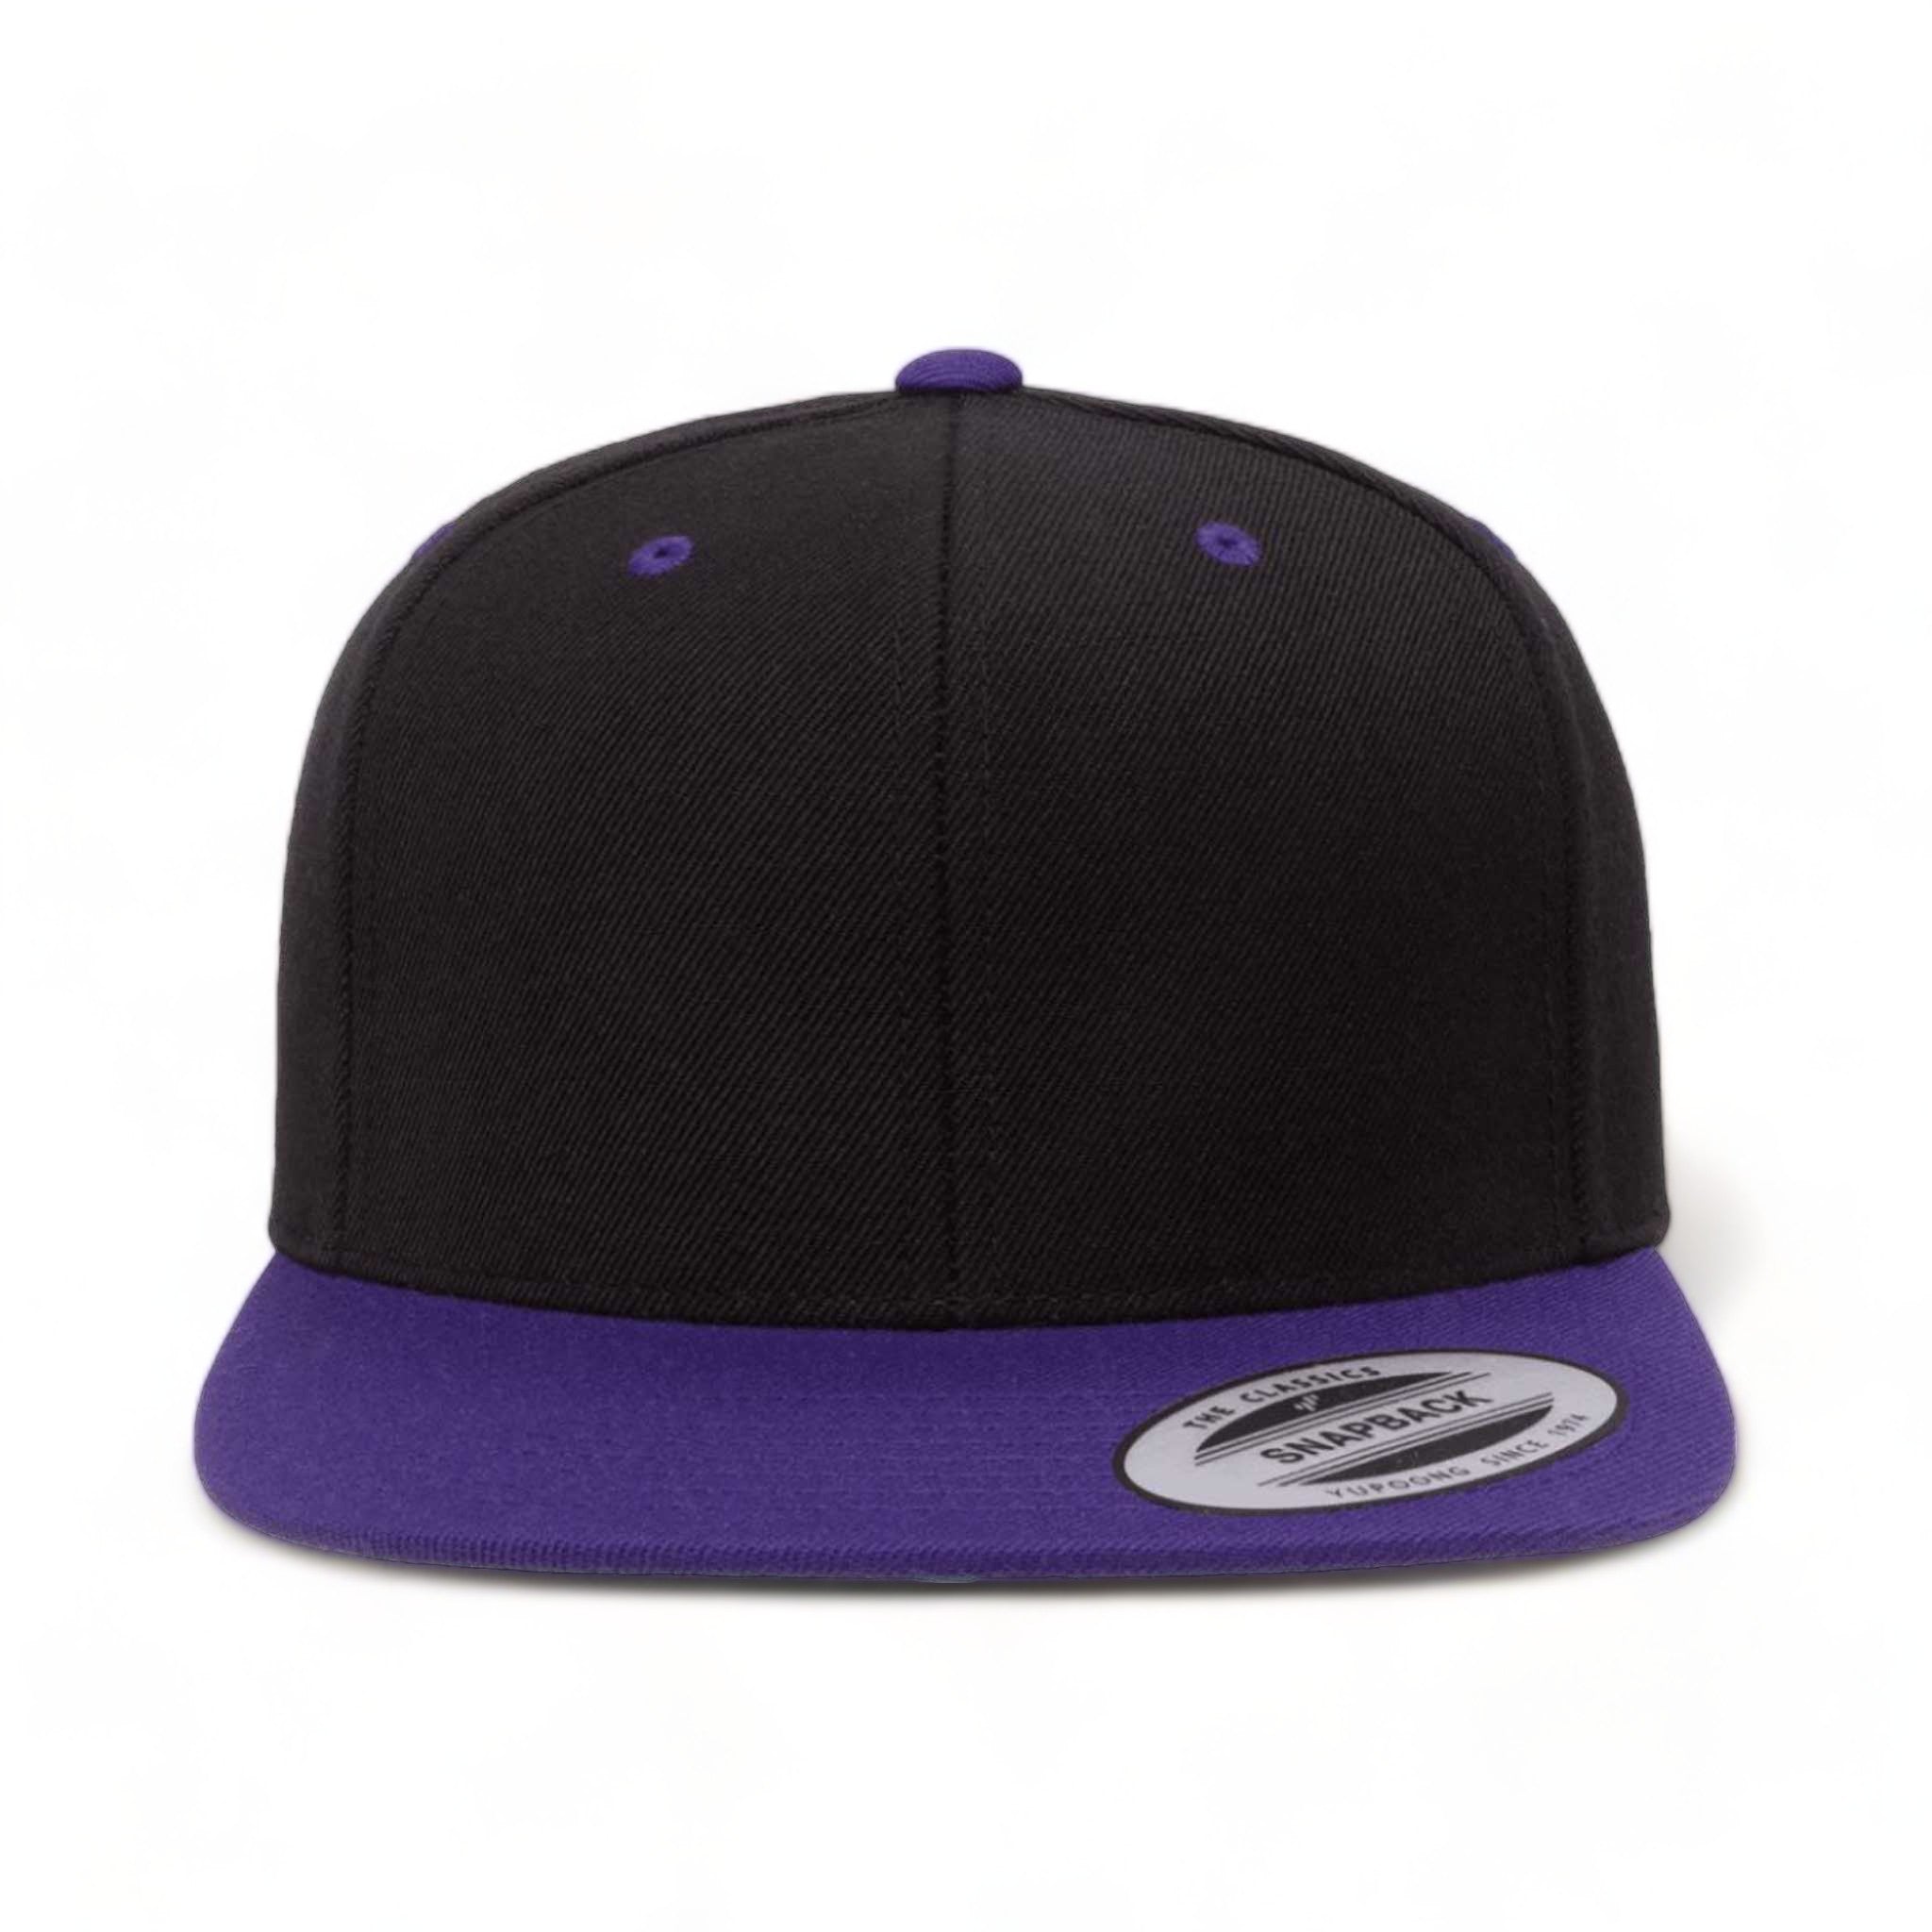 Front view of YP Classics 6089M custom hat in black and purple